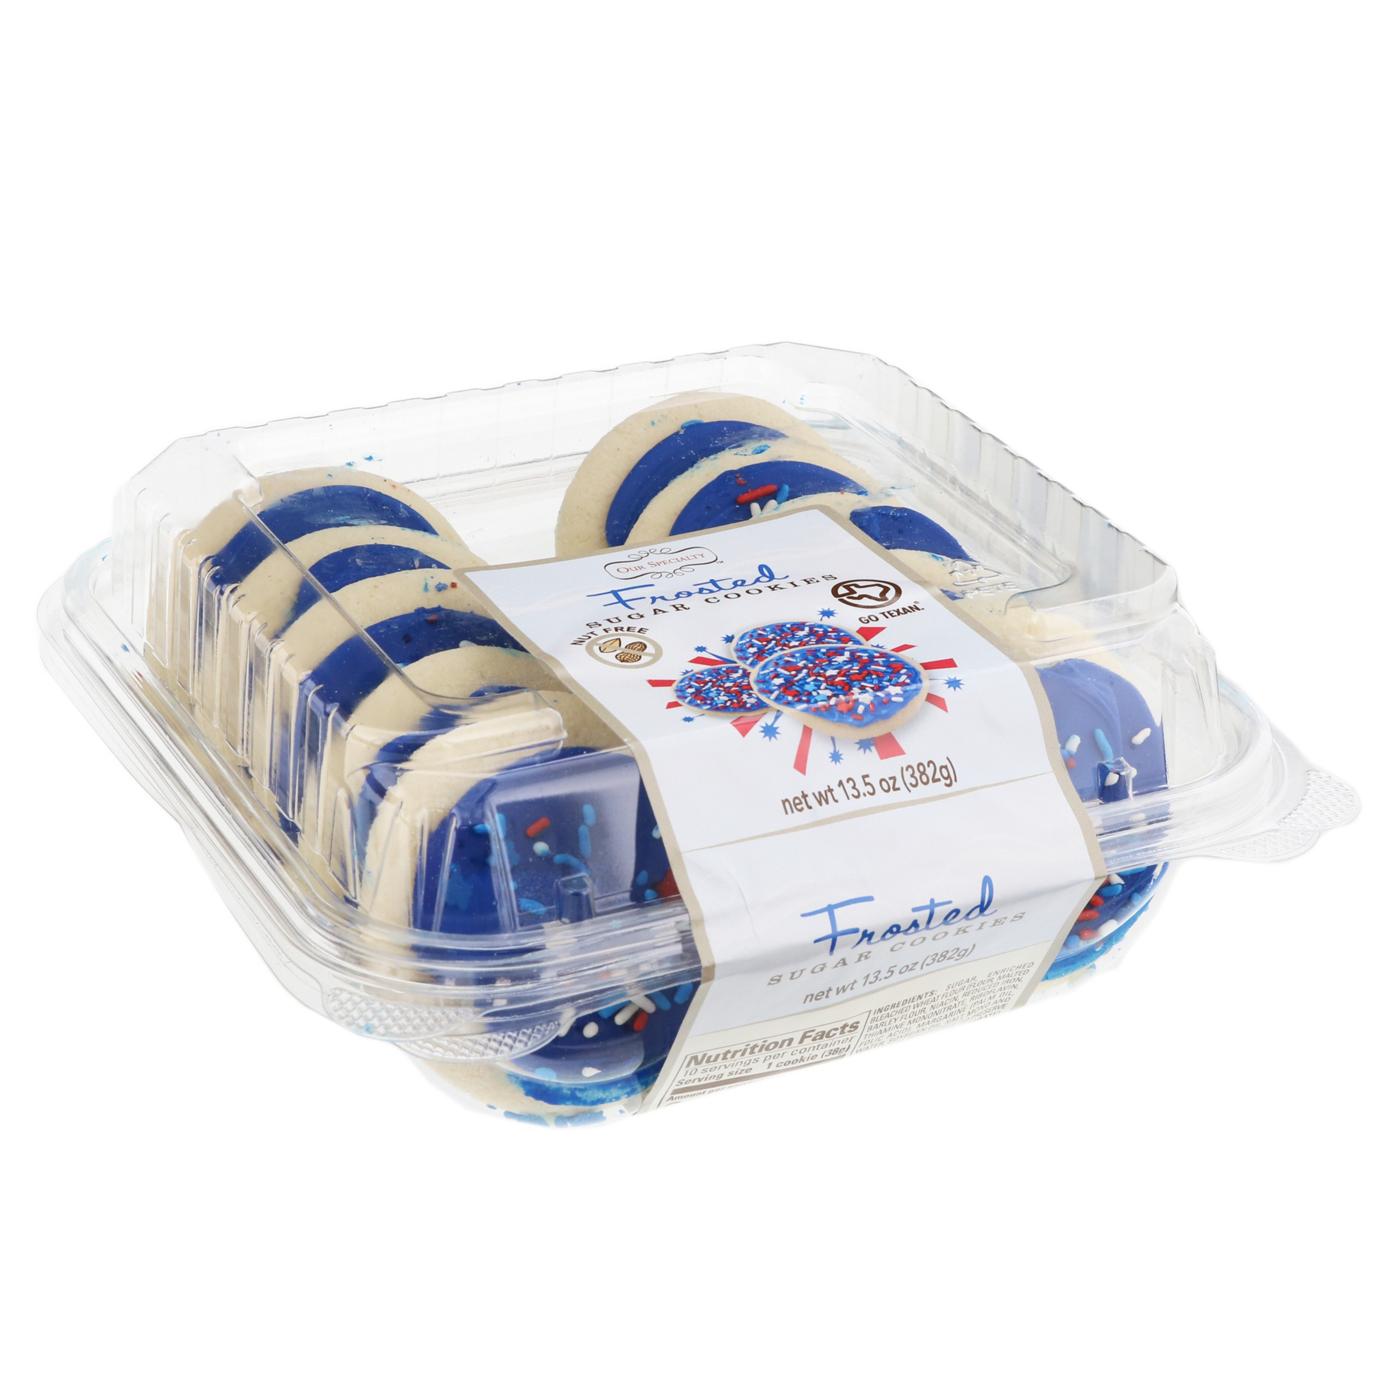 Rich's Patriotic Blue Frosted Cookies; image 2 of 2